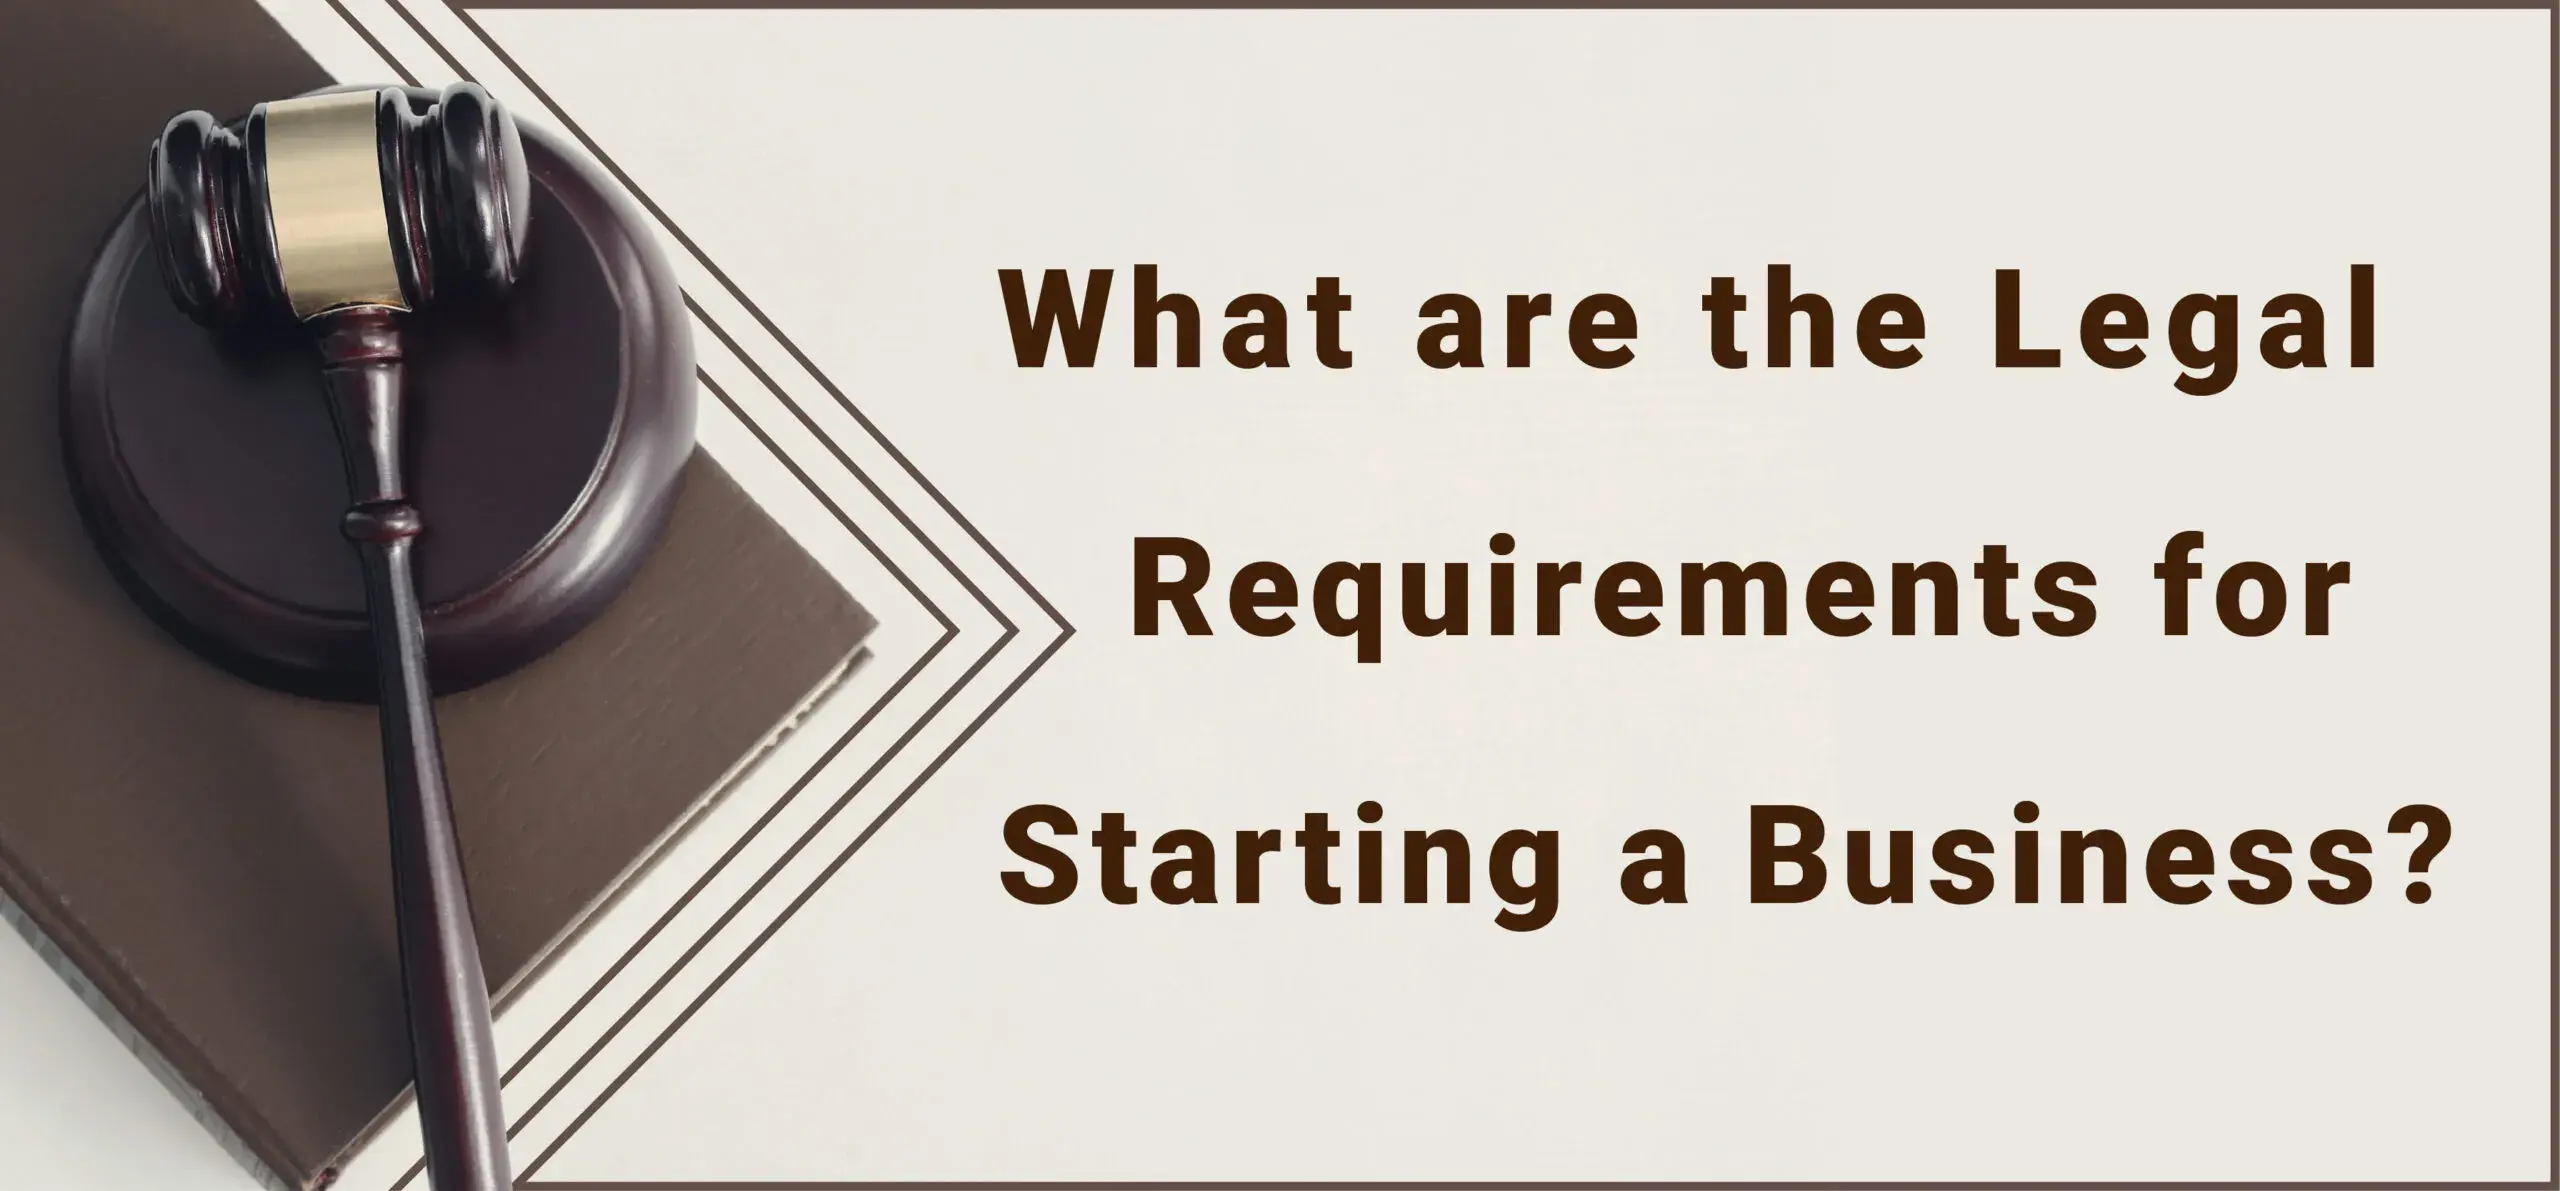 What are the Legal Requirements for Starting a Business?